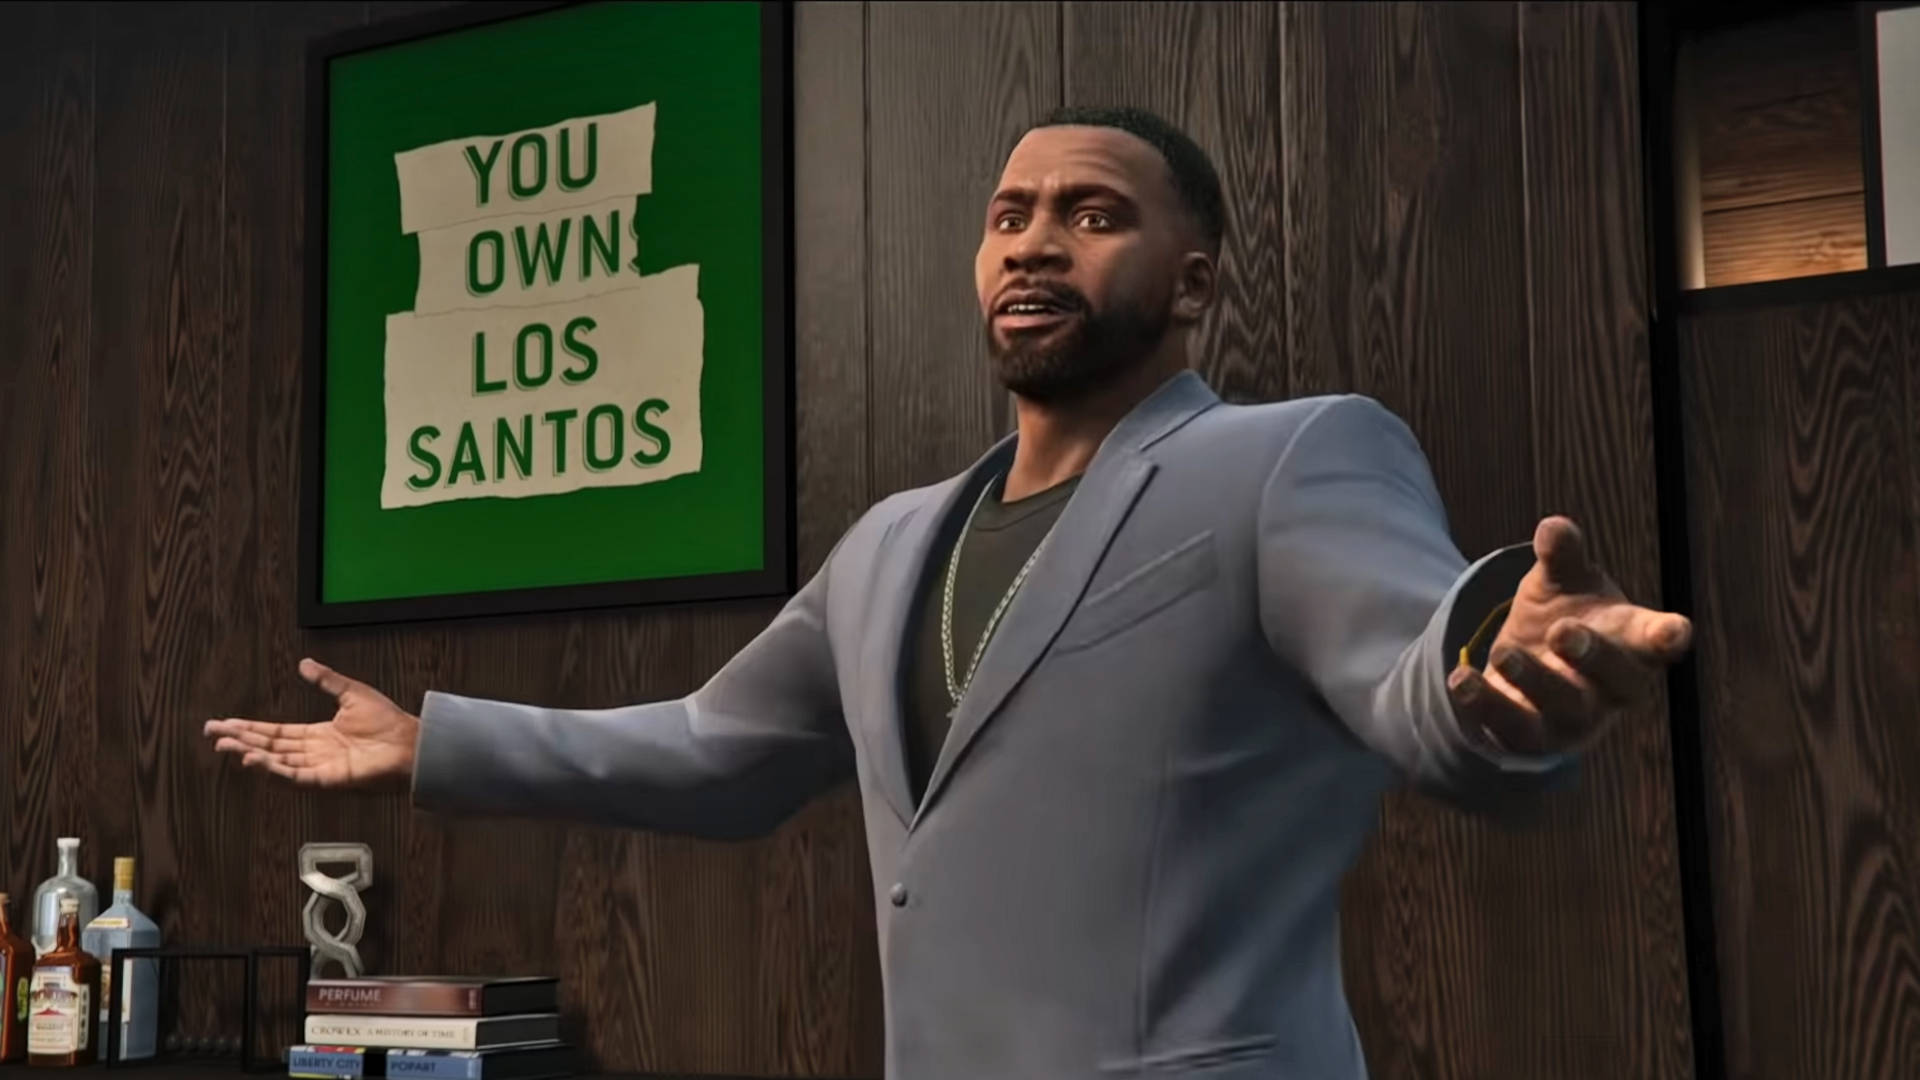 GTA Online tips and tricks: What to do after finishing GTA 5